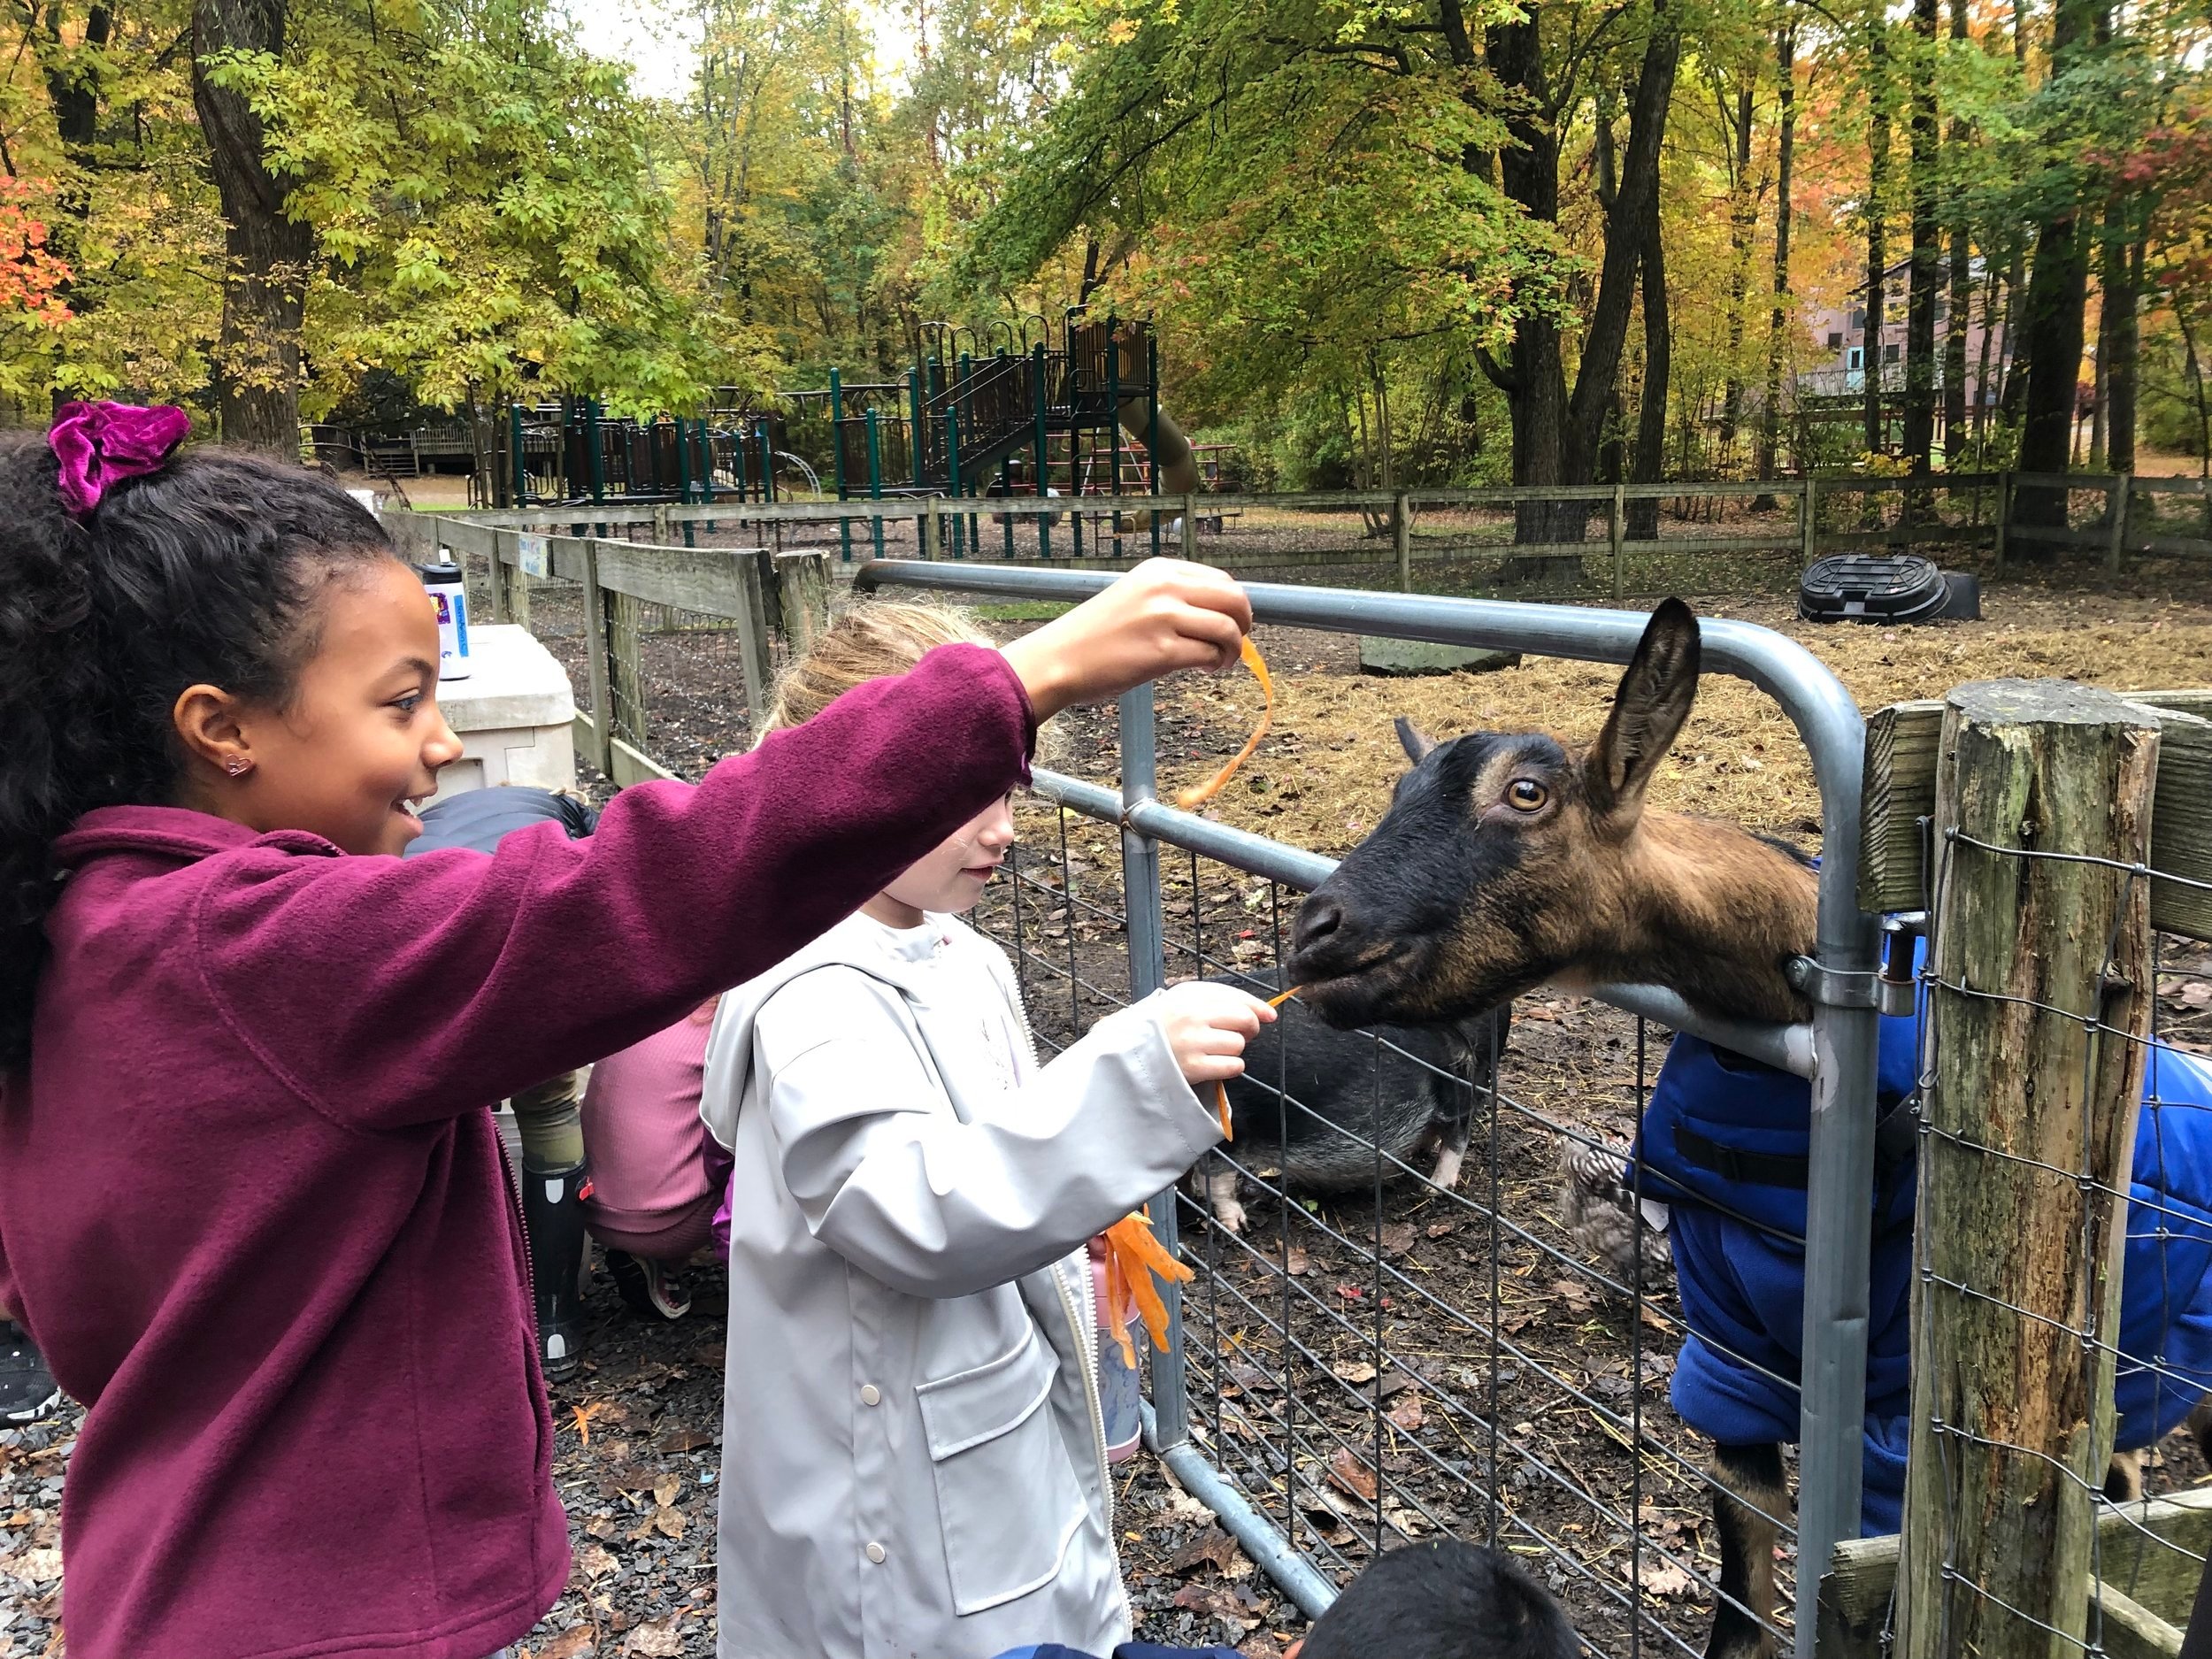 Corlears students making animal friends at camp